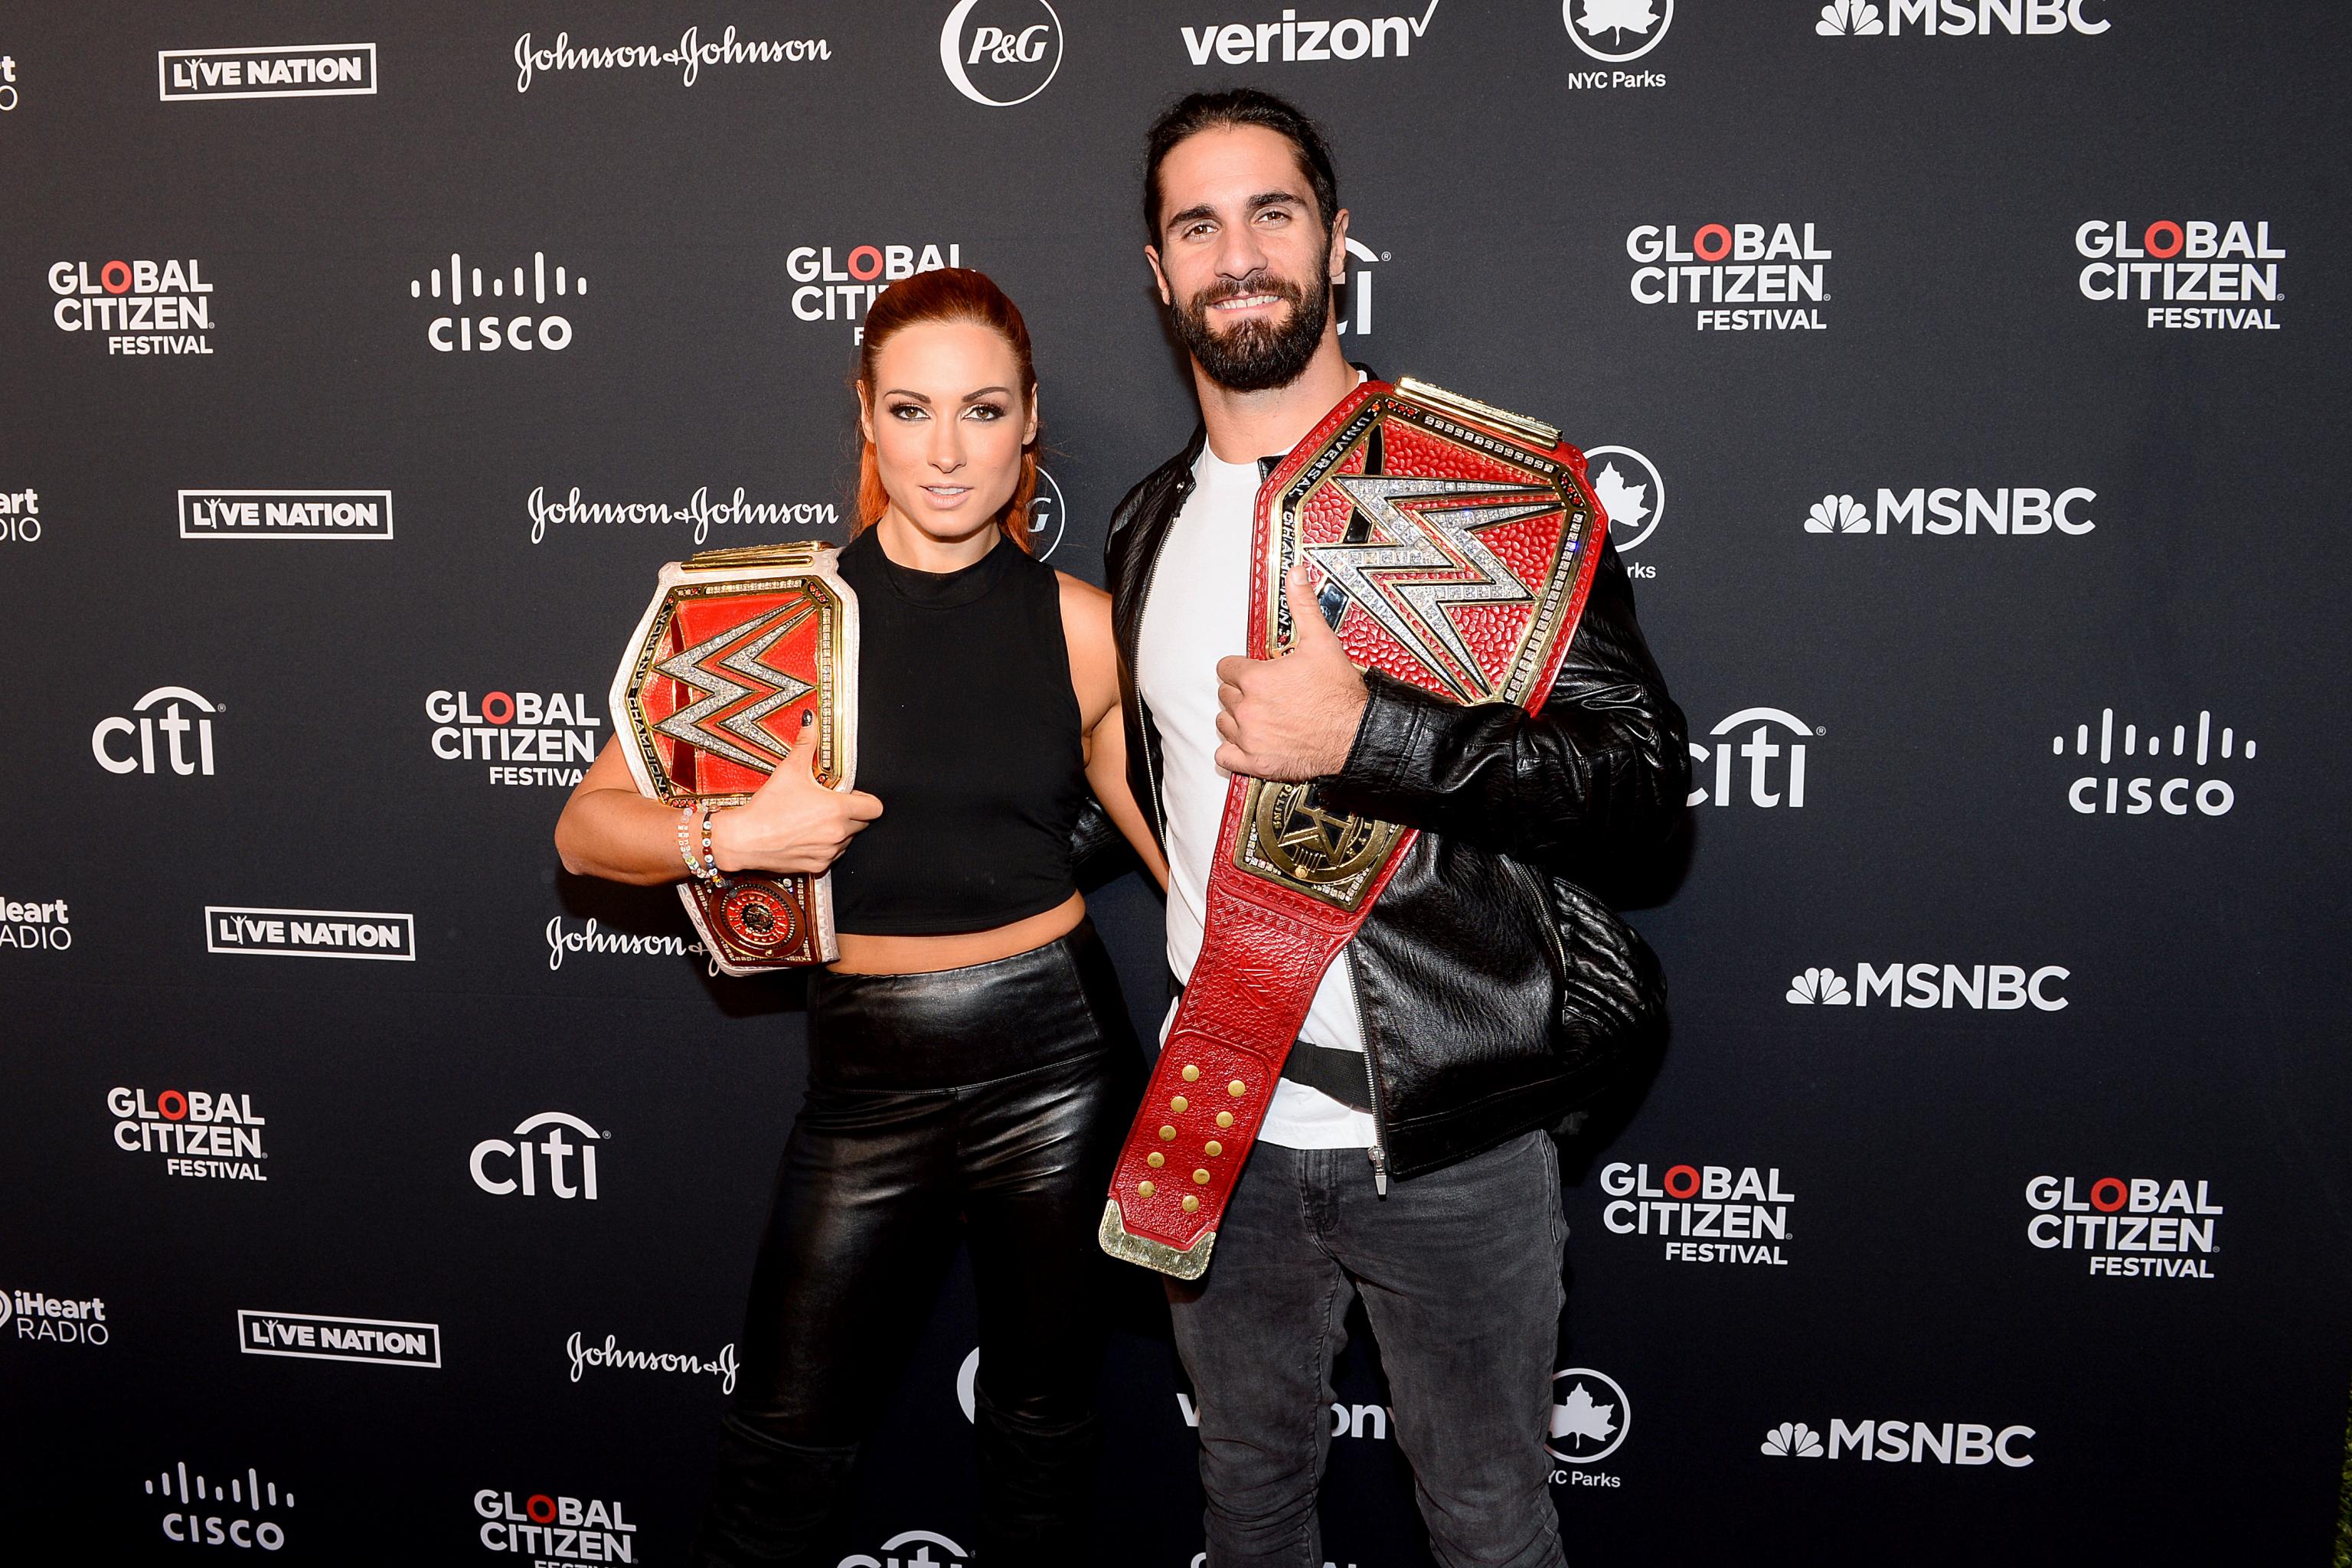 WWE champions Seth Rollins and Becky Lynch get engaged